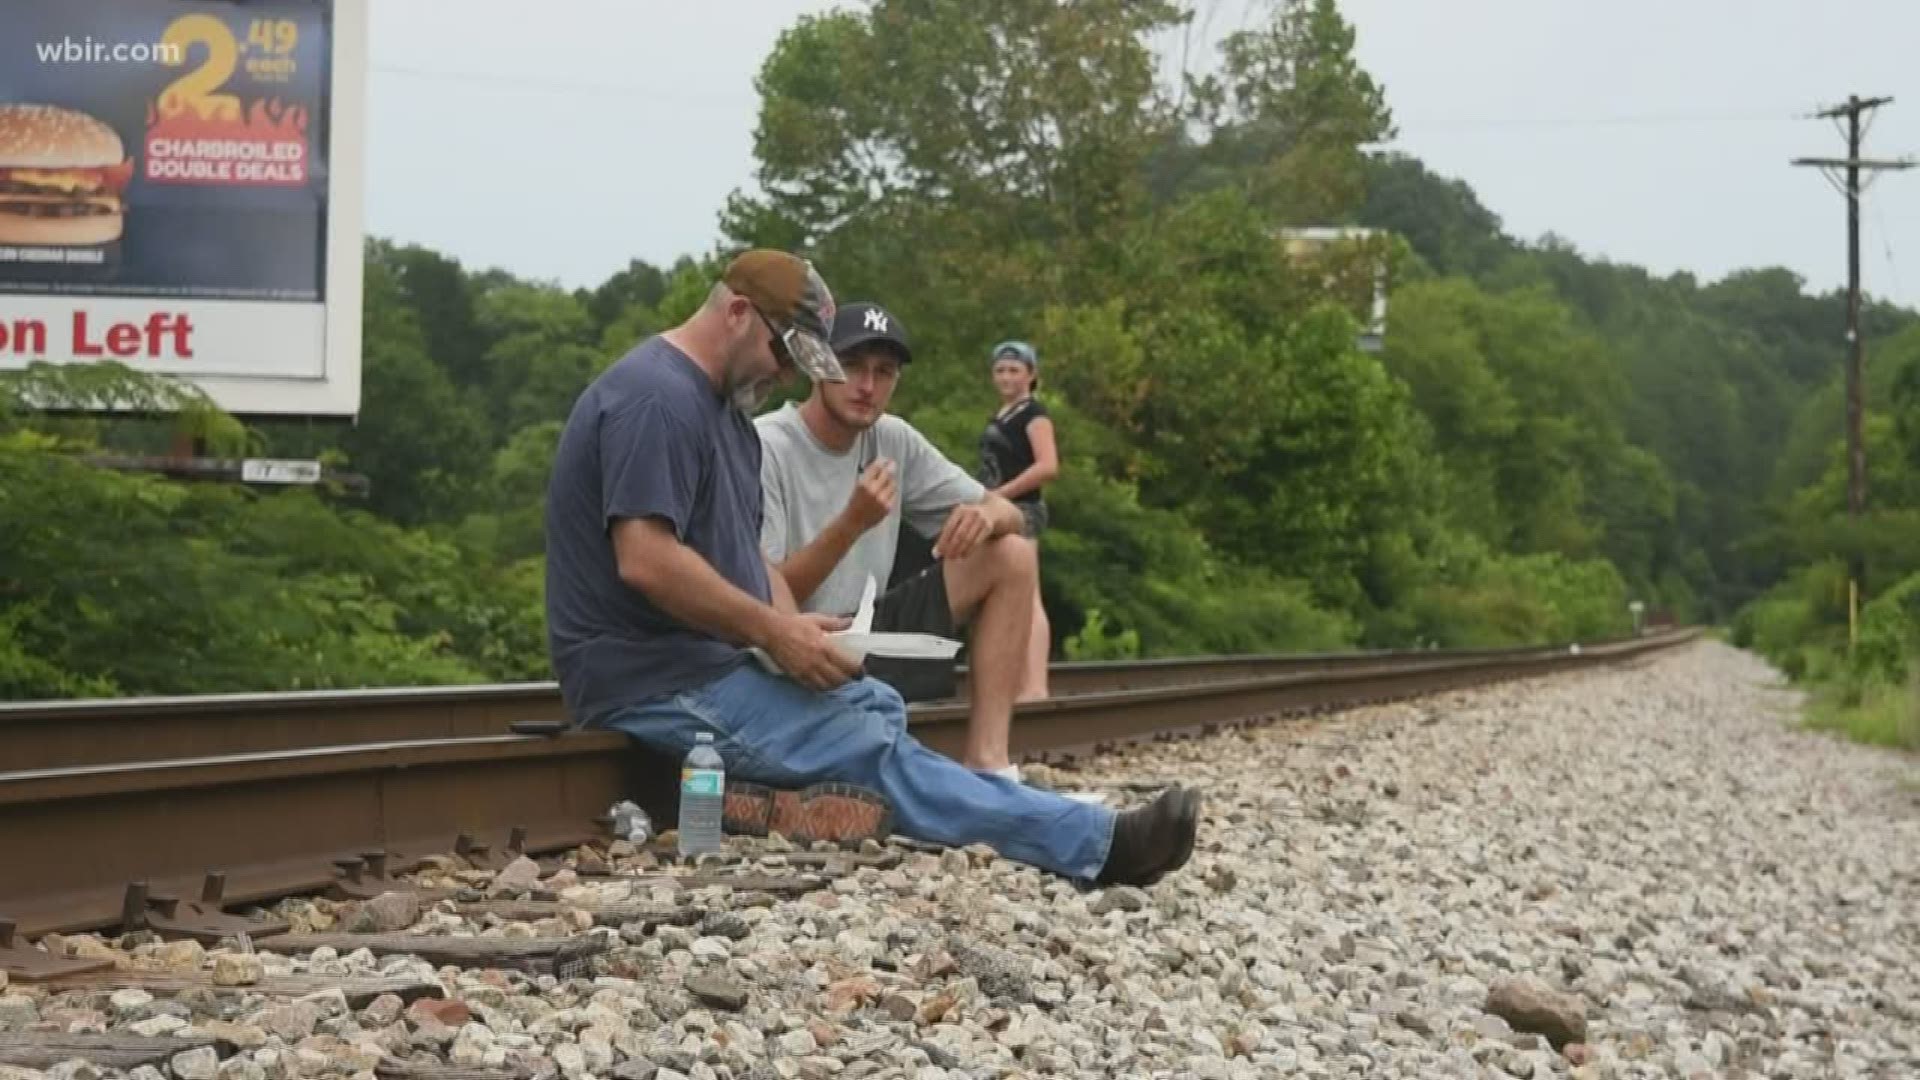 About 40 to 50 protesters are camping out on the tracks near Cumberland to block coal trains from passing. It comes after Blackjewel mining abruptly filed for bankruptcy July 1st.